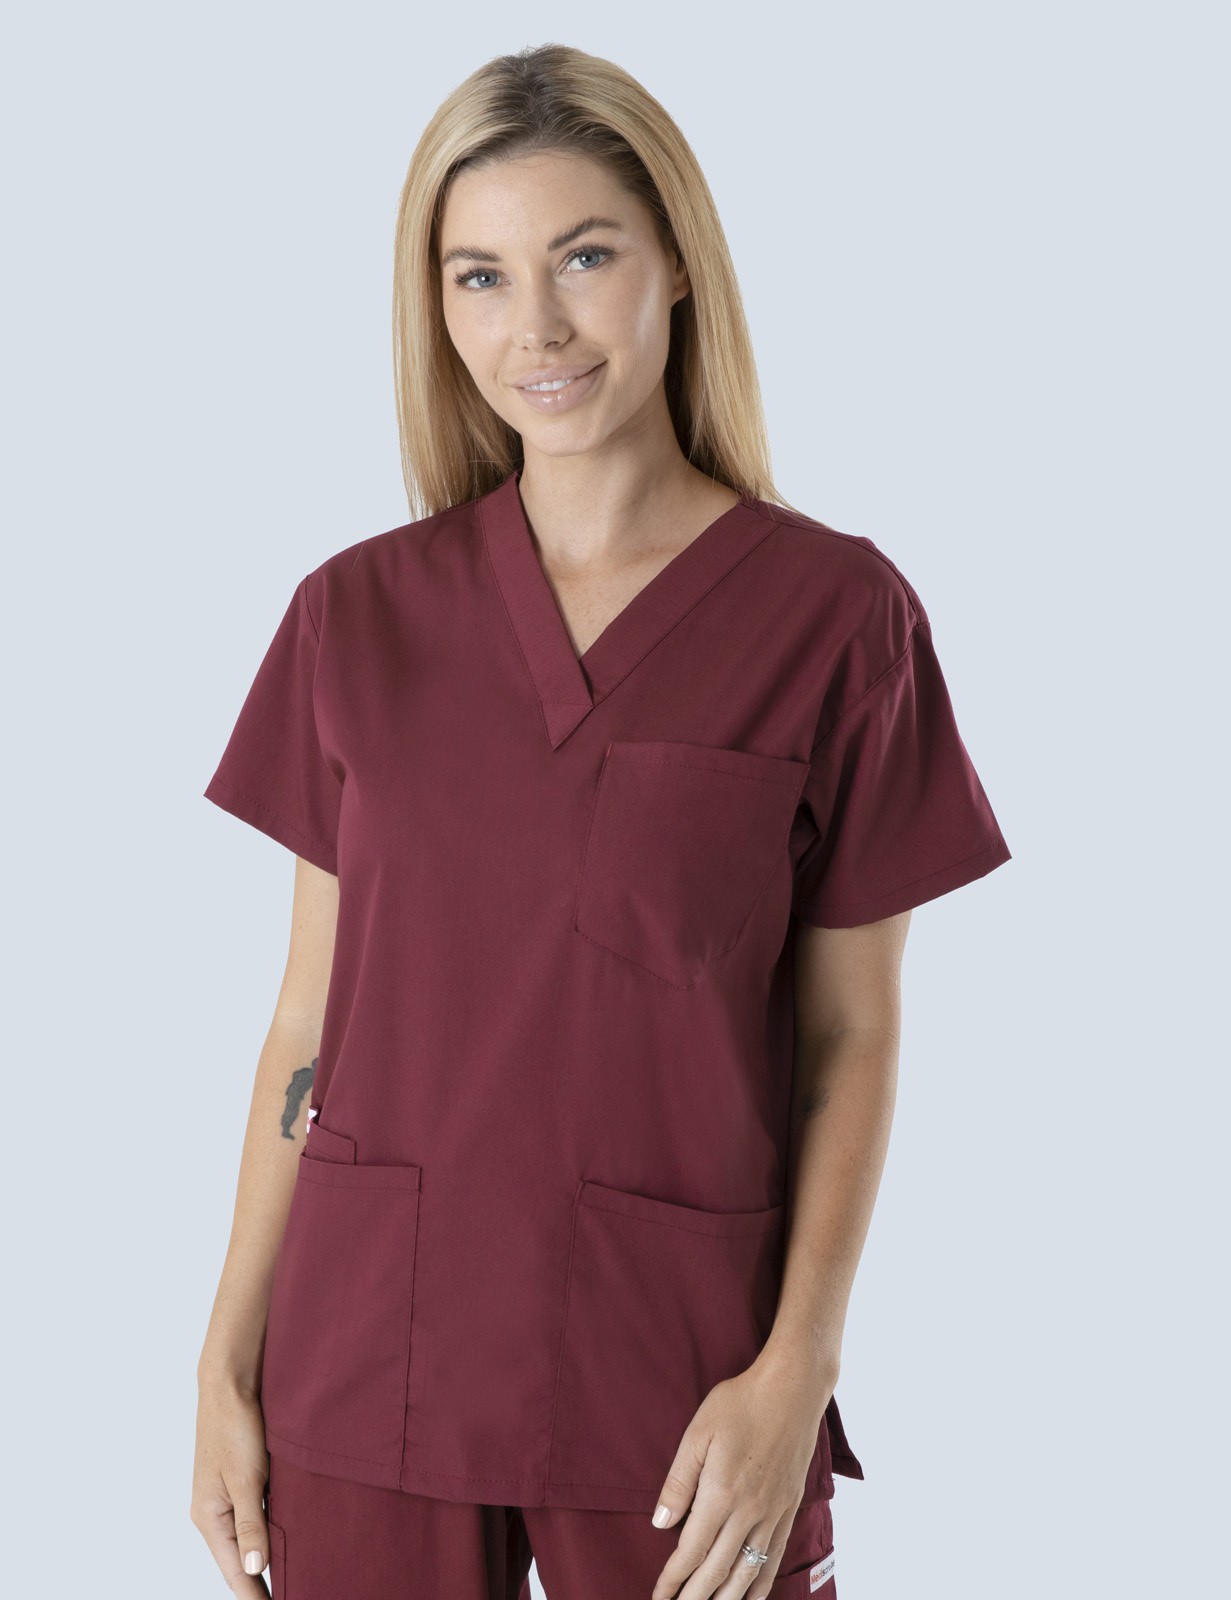 University Of Wollongong Uniform Top Only Bundle (Women's Fit Solid Top in Burgundy + Logos)